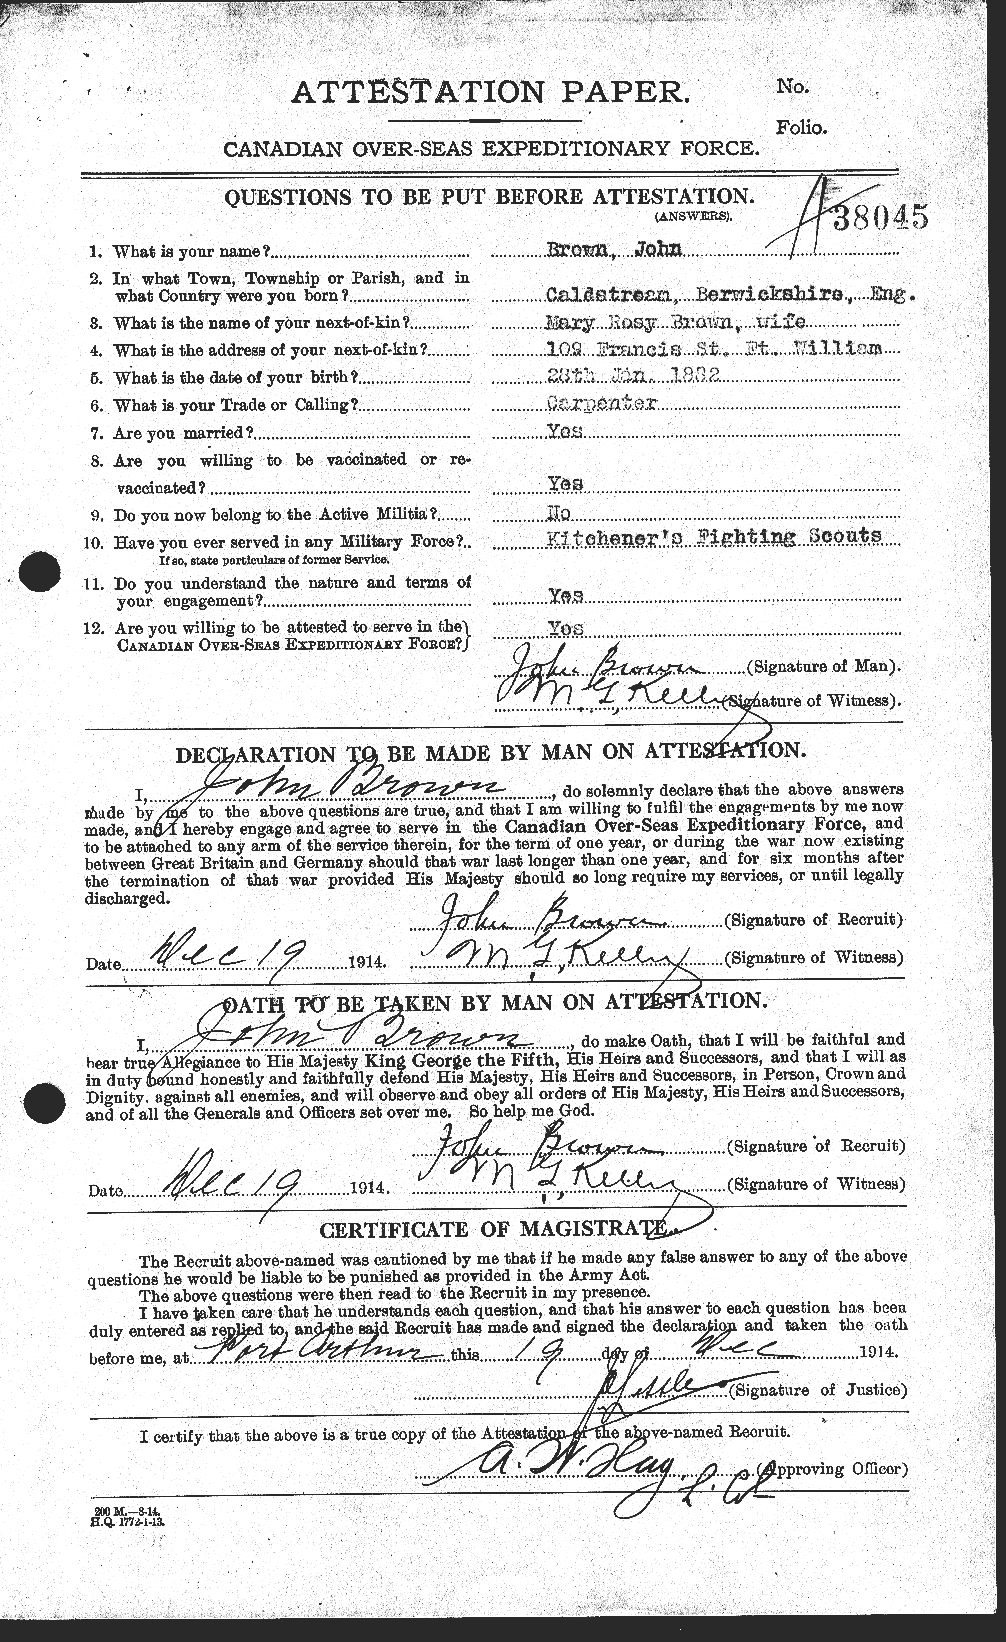 Personnel Records of the First World War - CEF 264532a